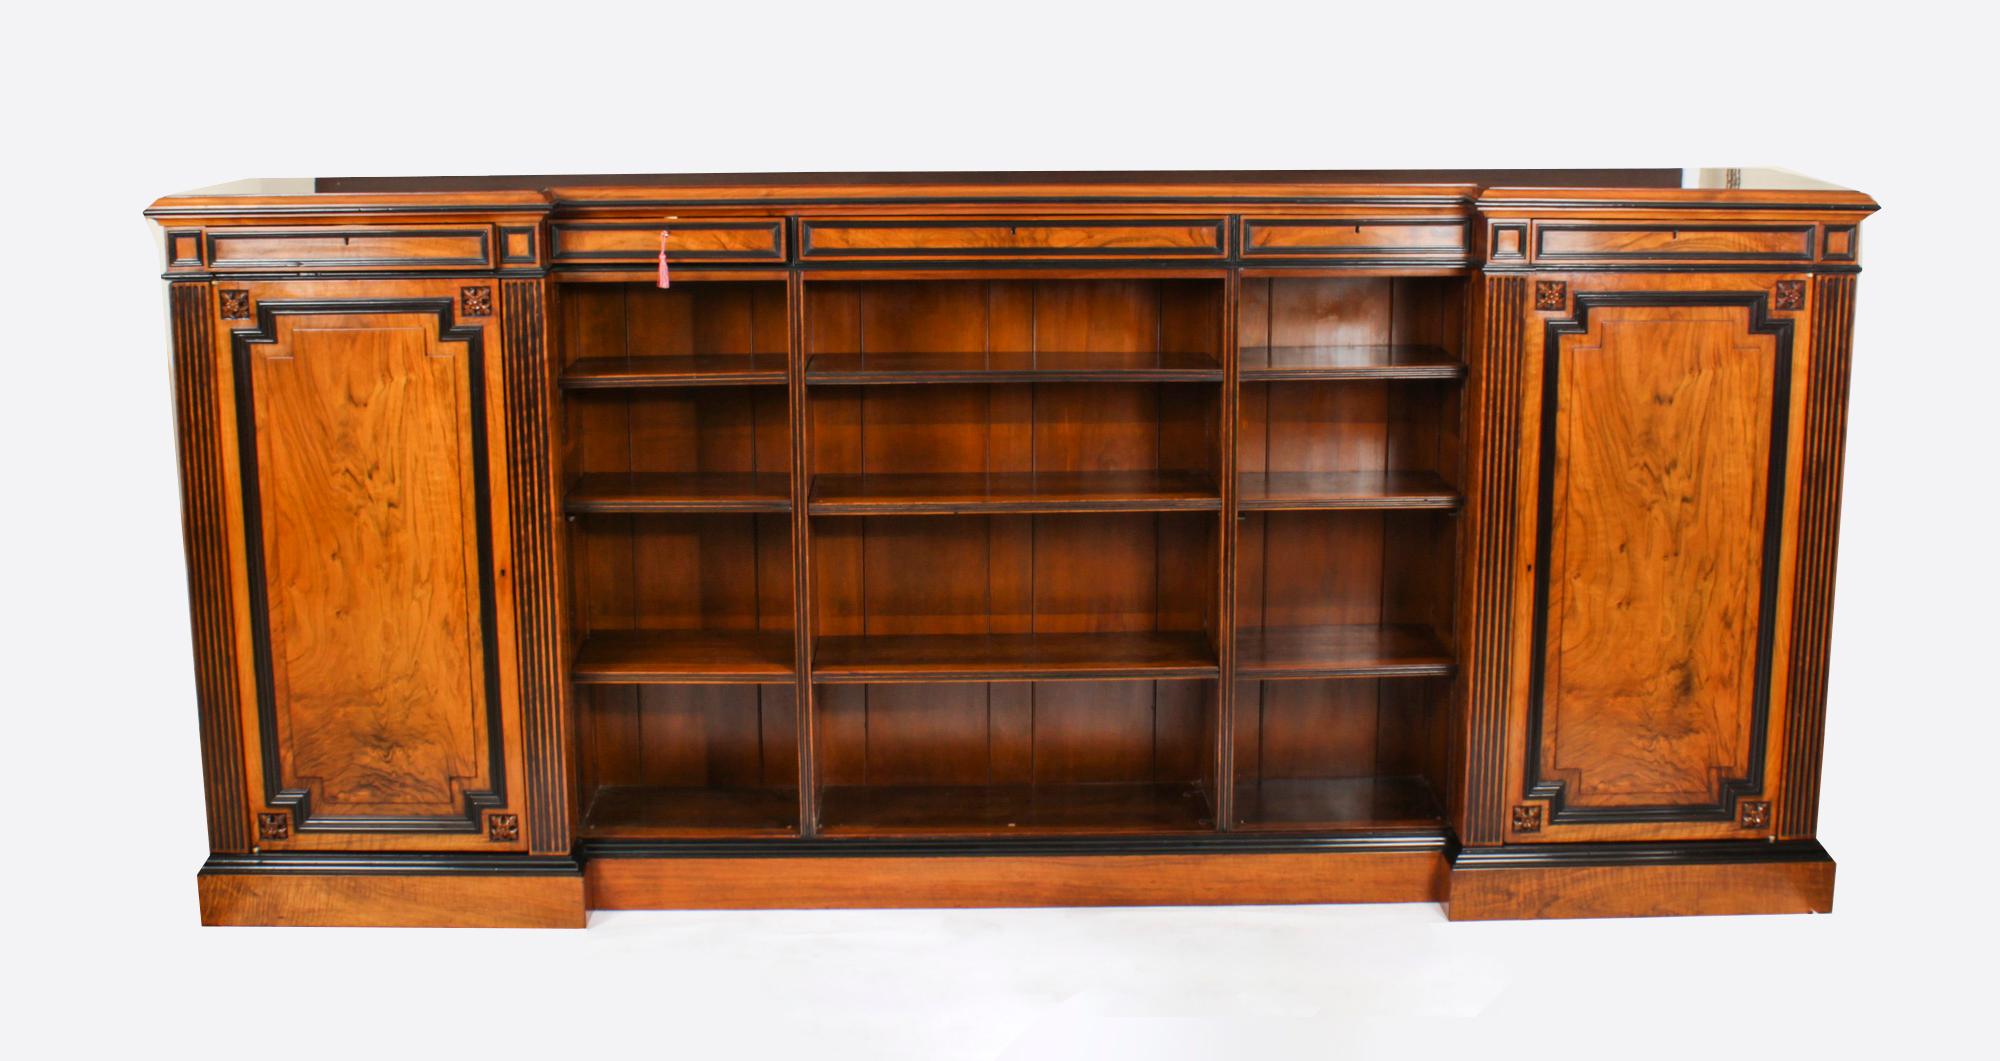 This is a beautiful antique William IV figured walnut and ebonised low breakfront bookcase, circa 1835 in date.
 
It has a shaped top with five frieze drawers above a central open bookcase with three adjustable shelves all between fluted columns.